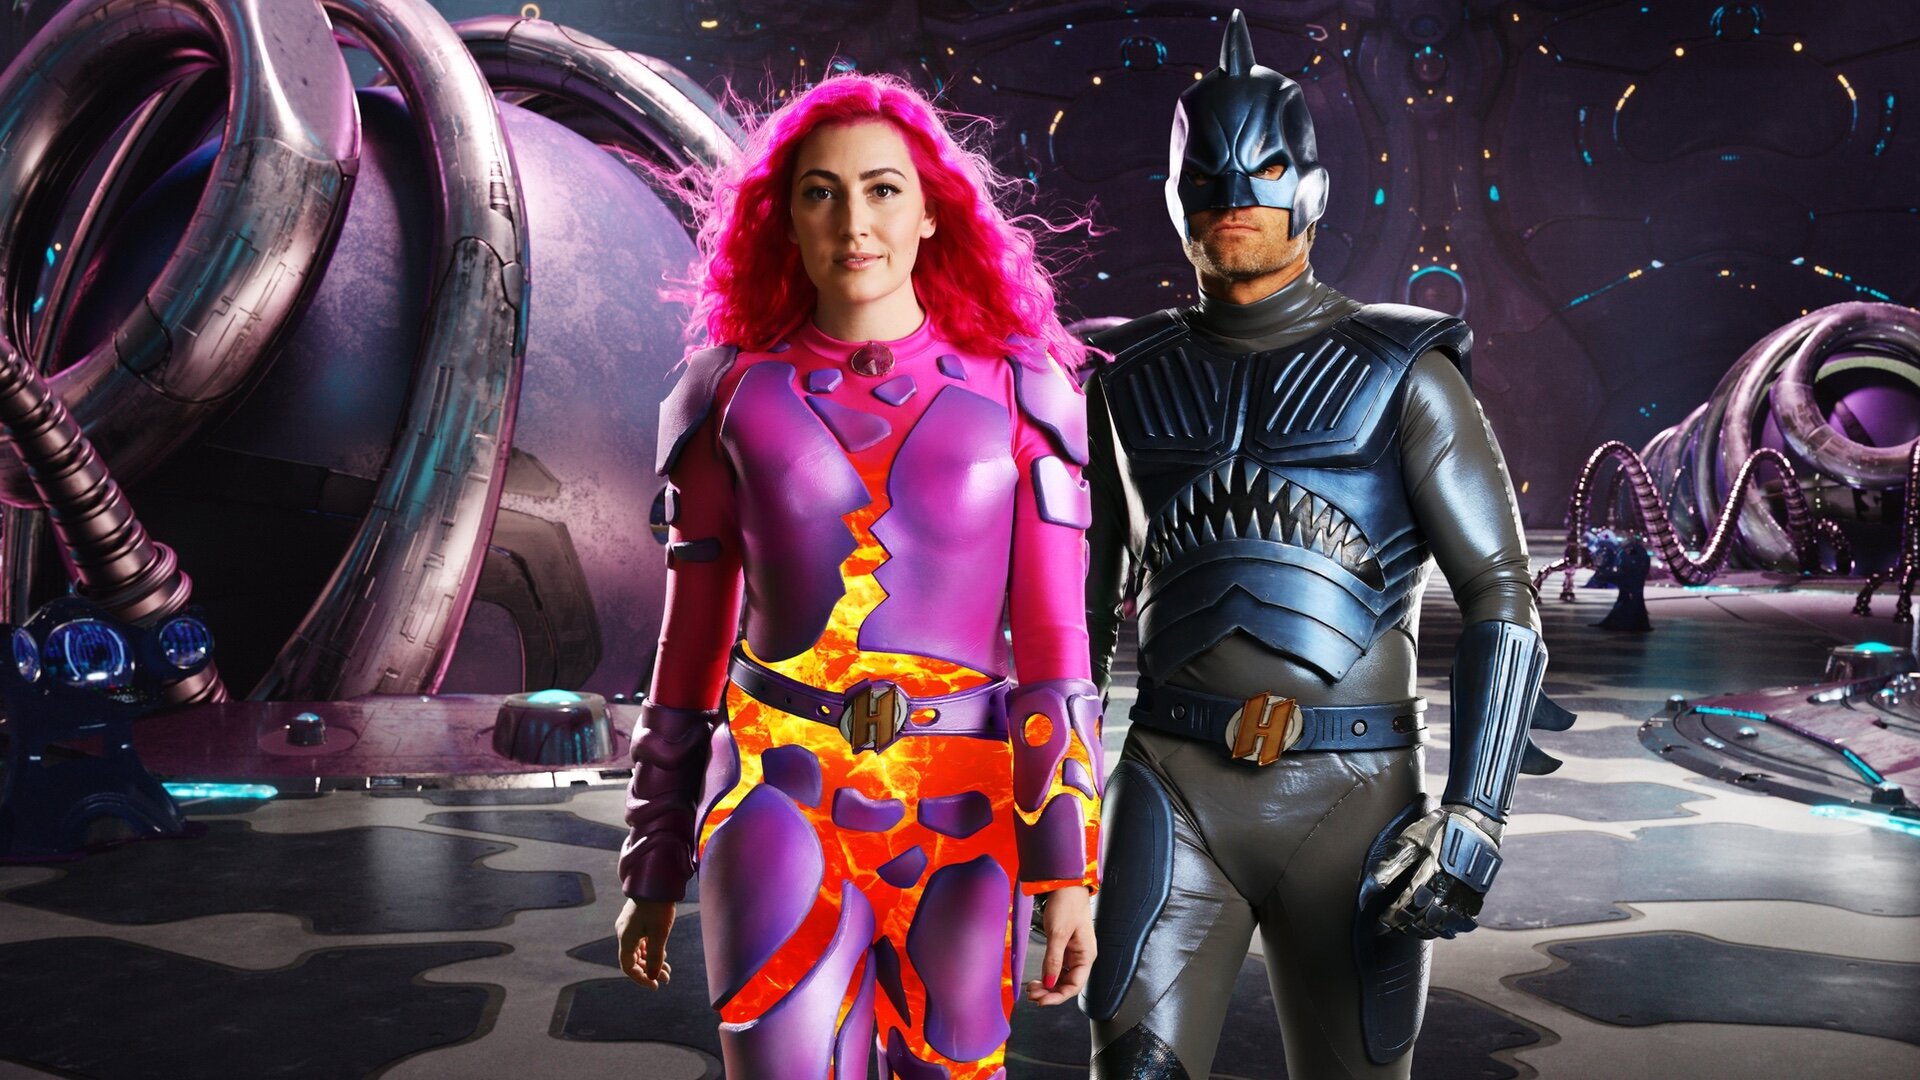 Sharkboy And Lava Girl Are All Grown Up In New Photos From Robert